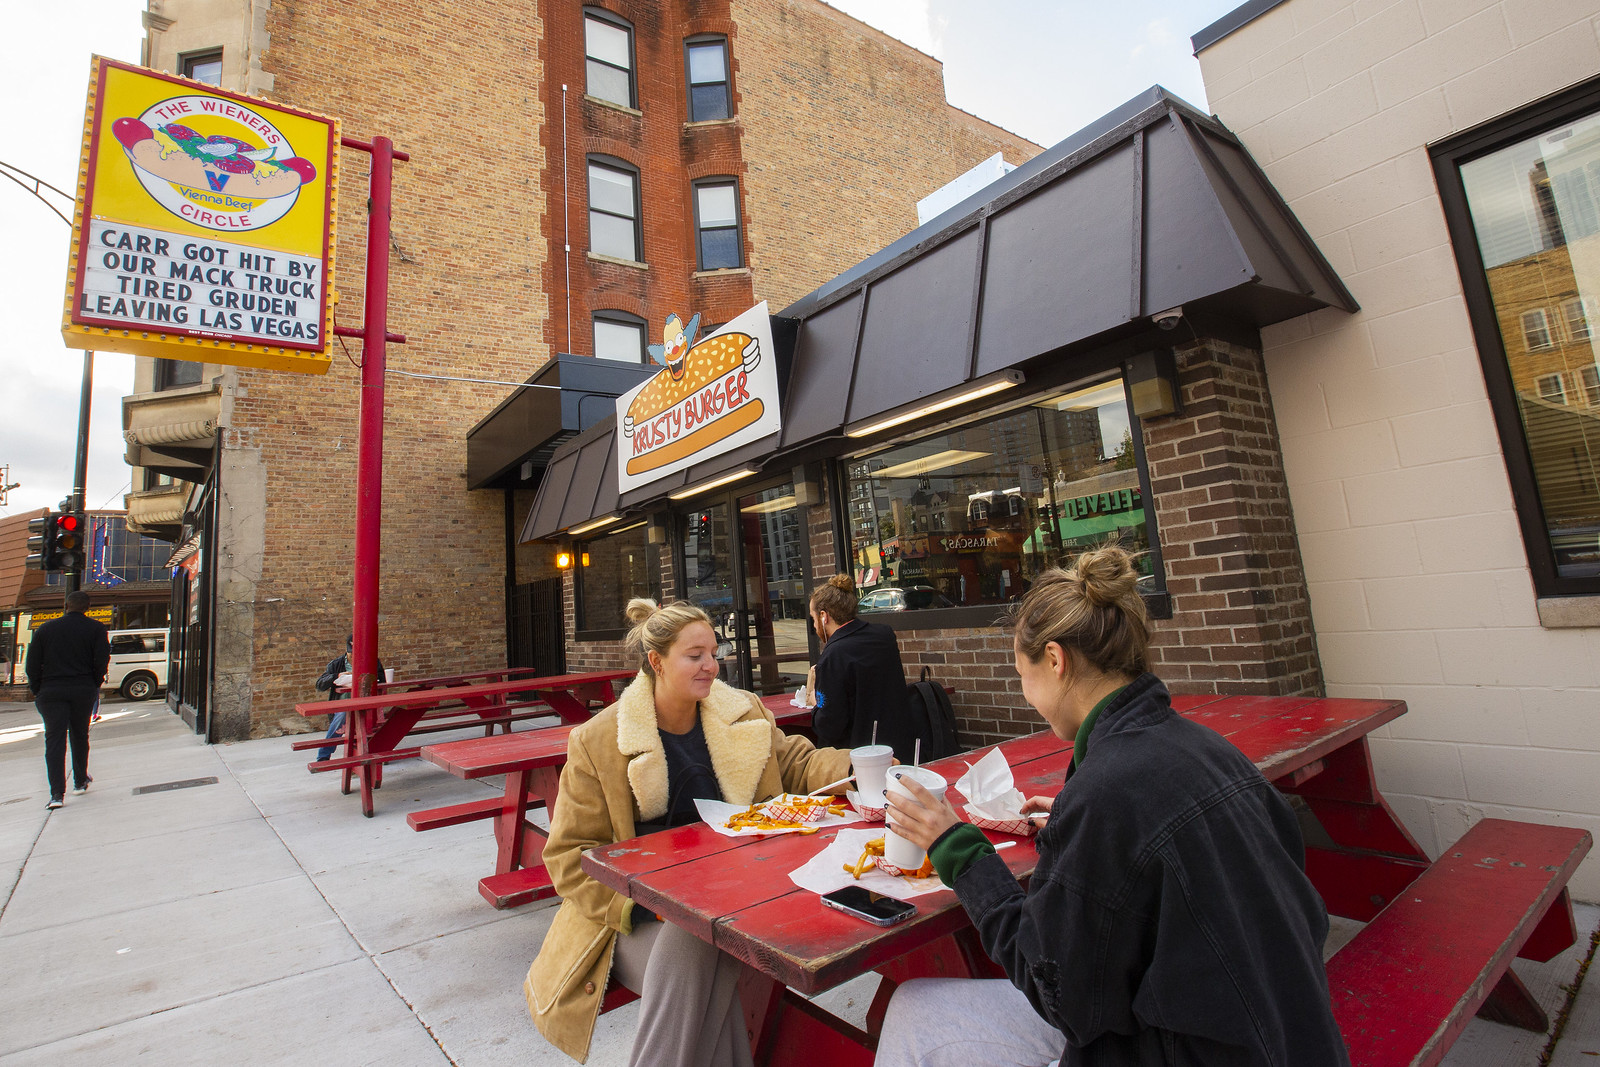 Two folks sitting on red picnic tables outside a hot dog stand with a tall sign in the background for Wiener’s Circle.